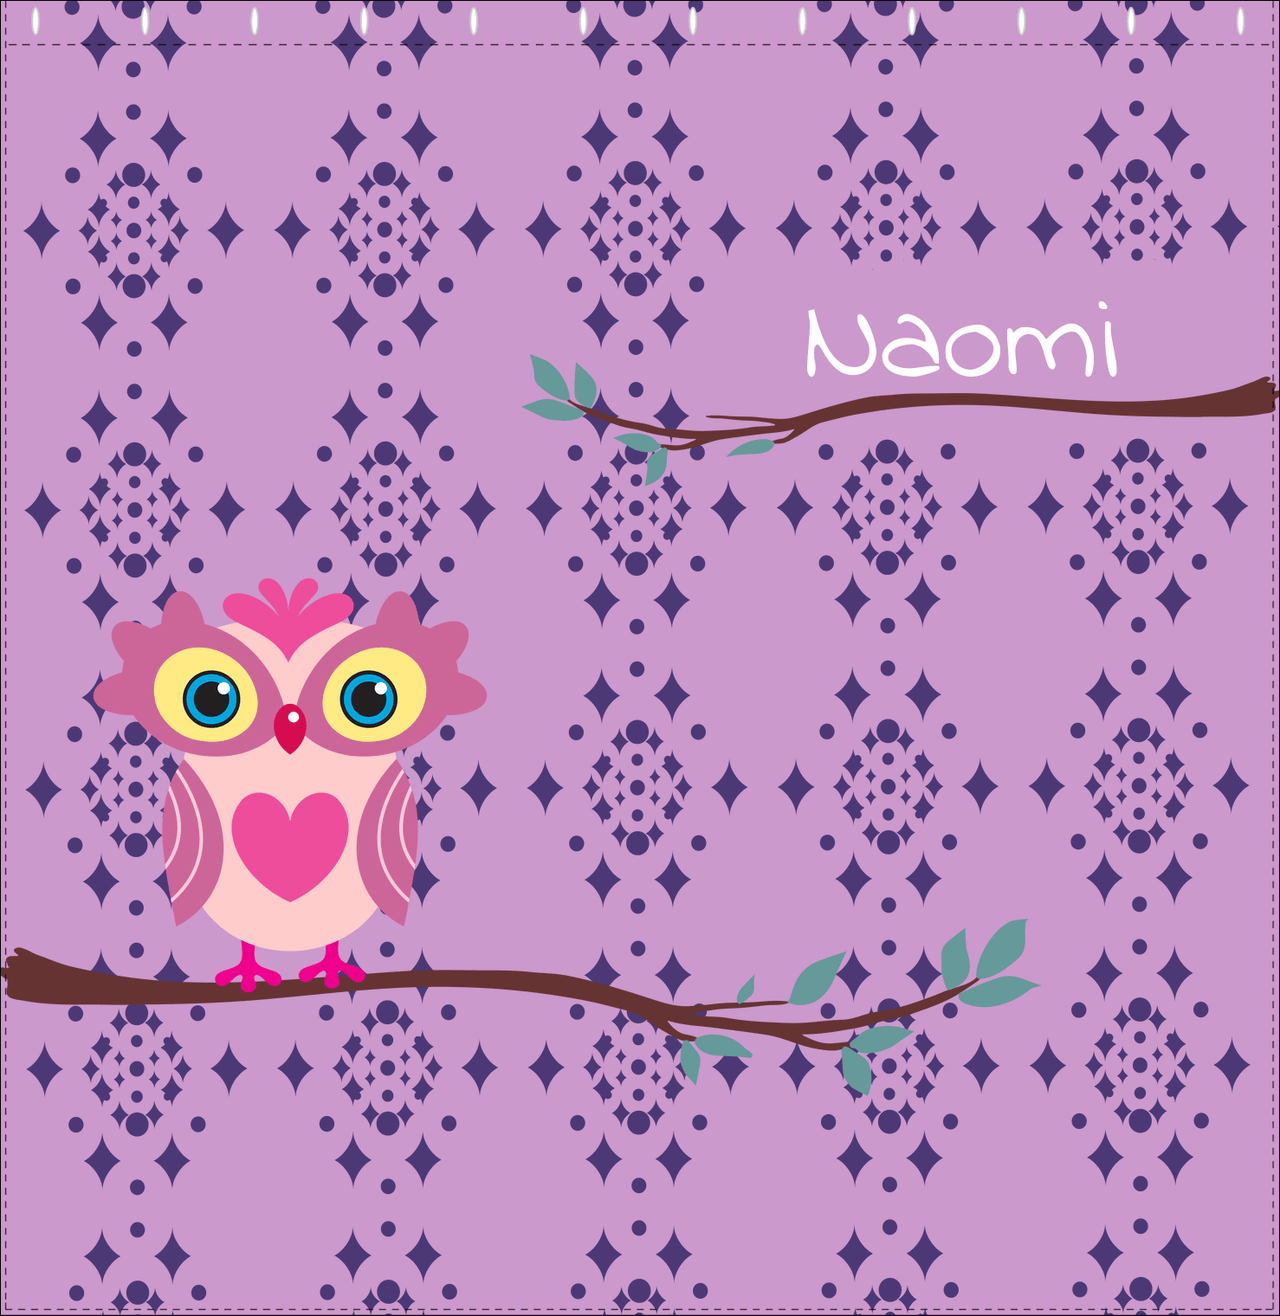 Personalized Owl Shower Curtain I - Owl 07 - Pink Background - Decorate View